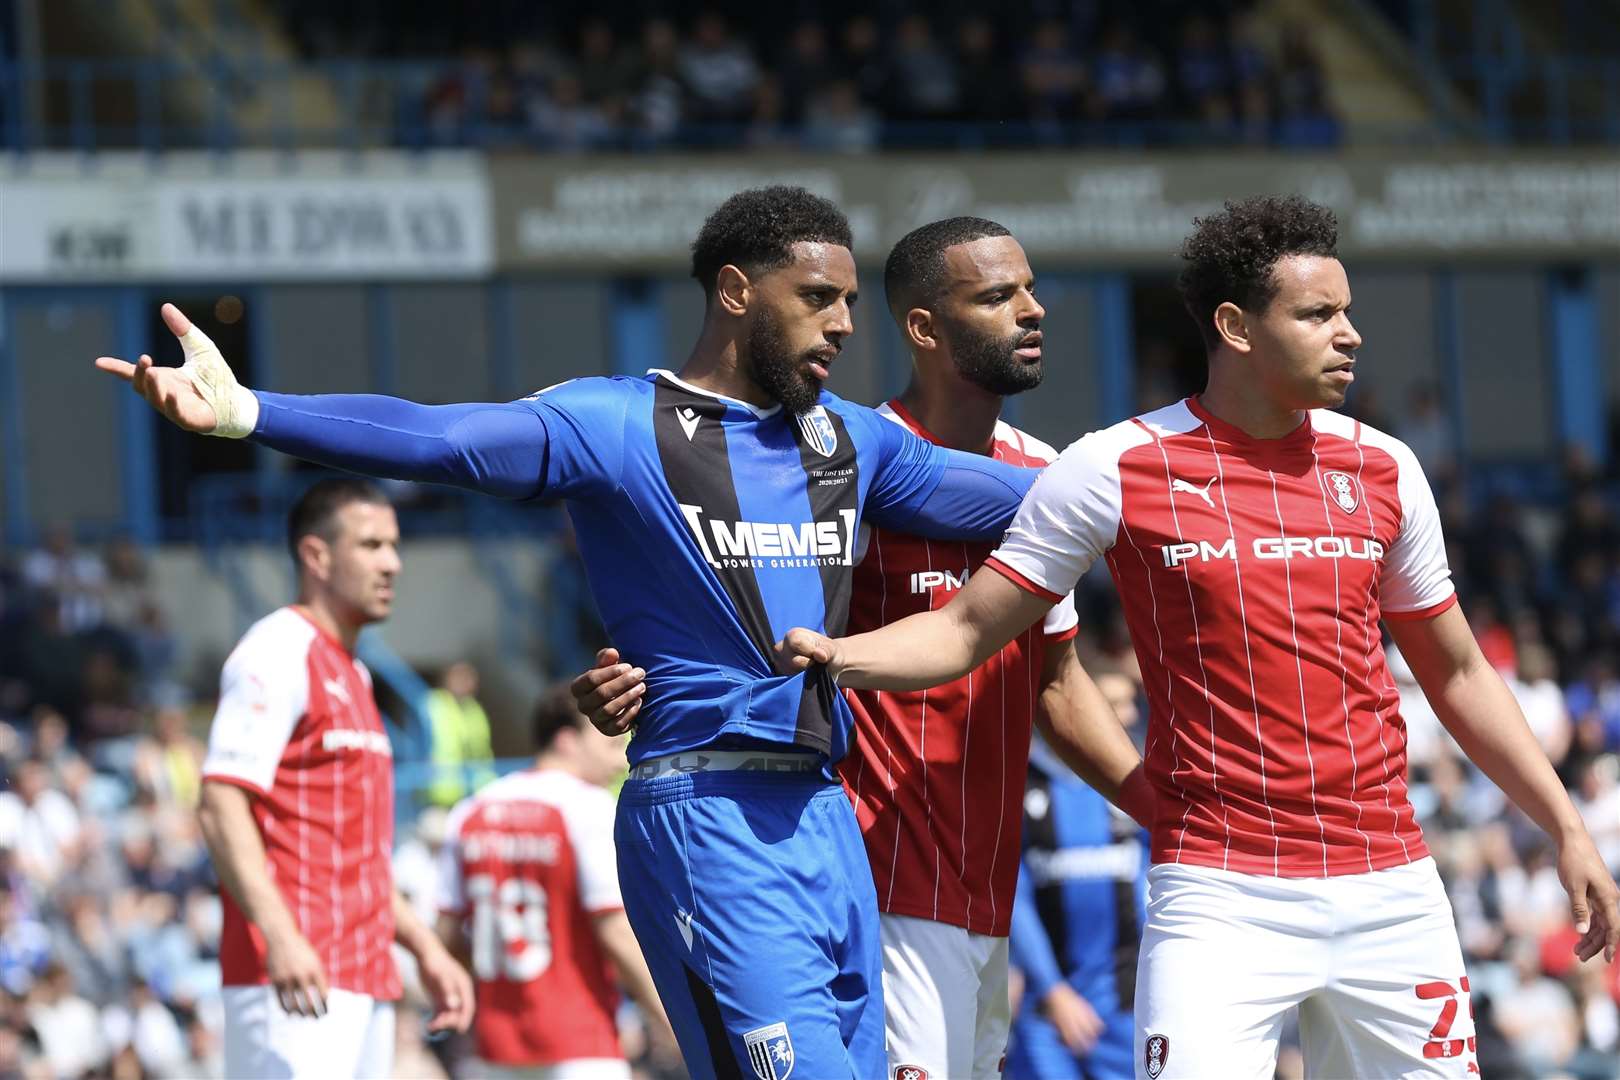 Action between Gillingham and Rotherham United Picture: KPI (56383513)